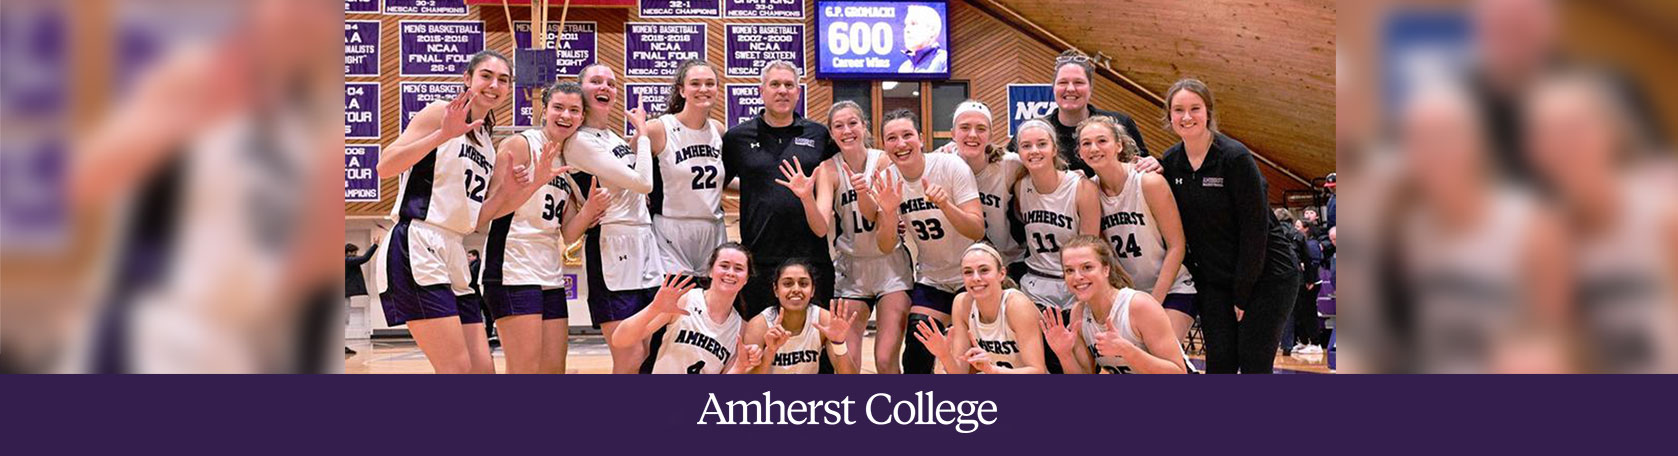 Coach G.P. Gromacki and the Amherst College women's basketball team celebrate a win.